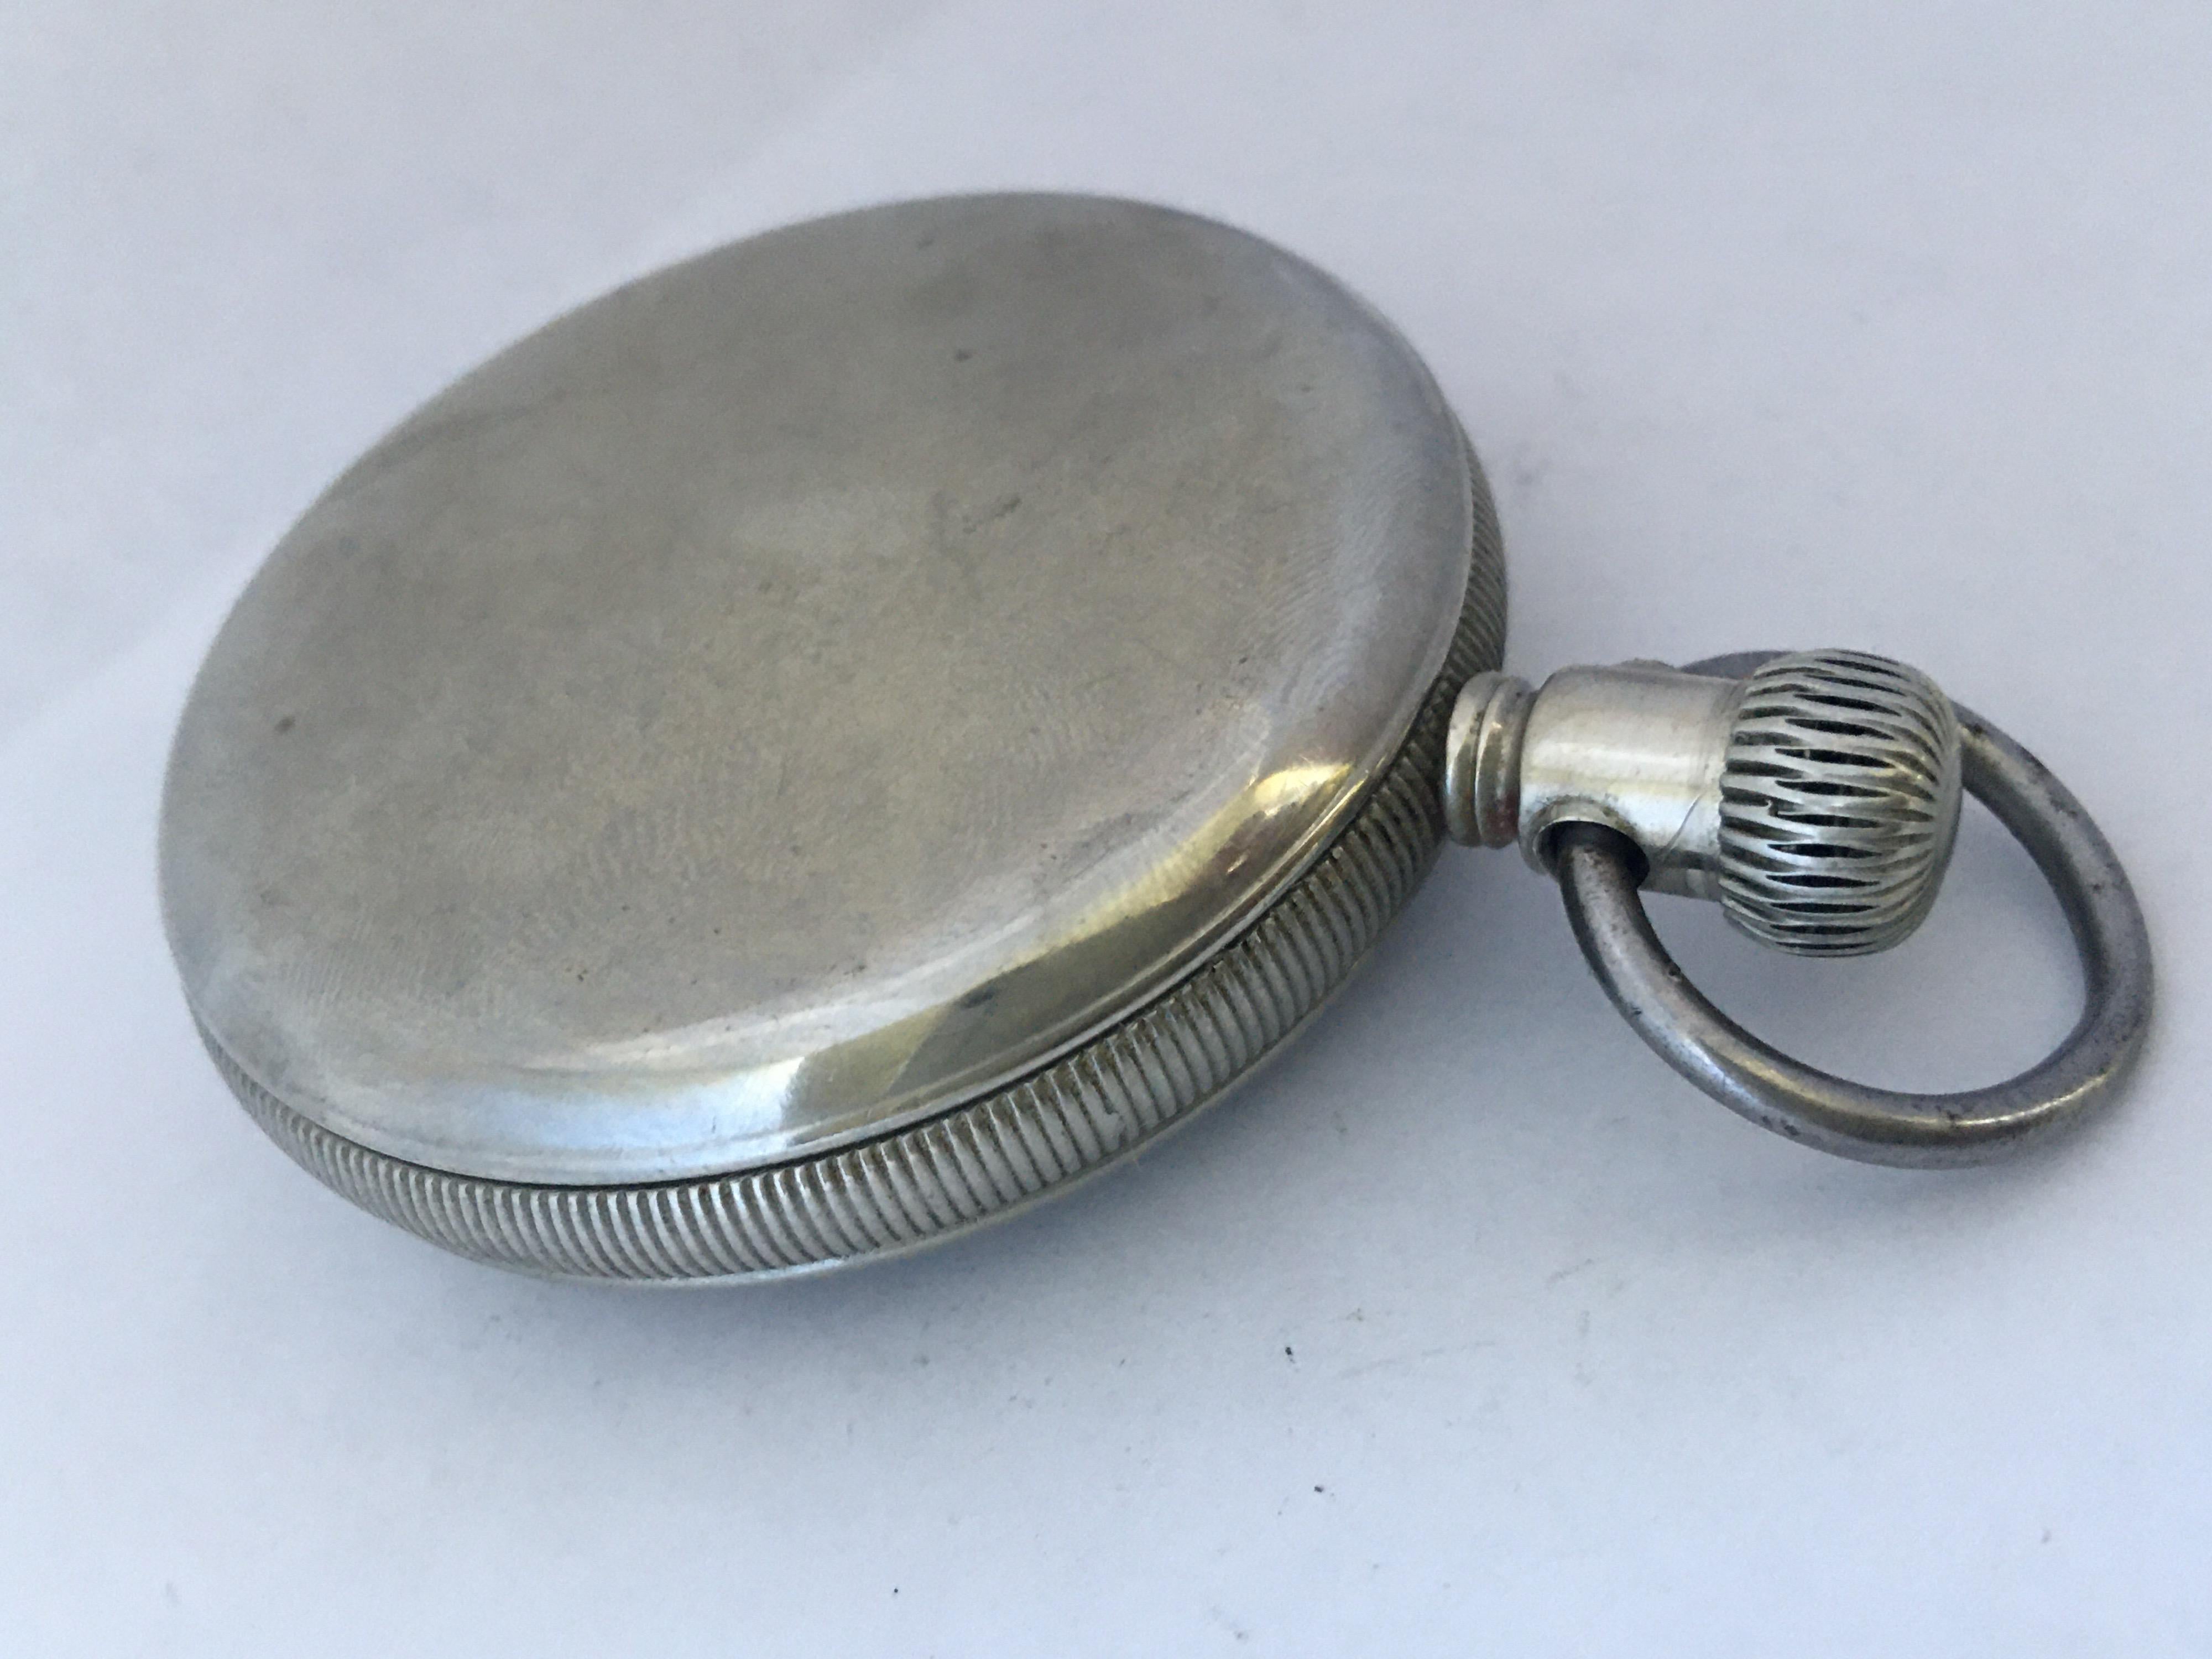 Antique Waterbury & Watch Co. Hand-Winding Pocket Watch For Sale 1